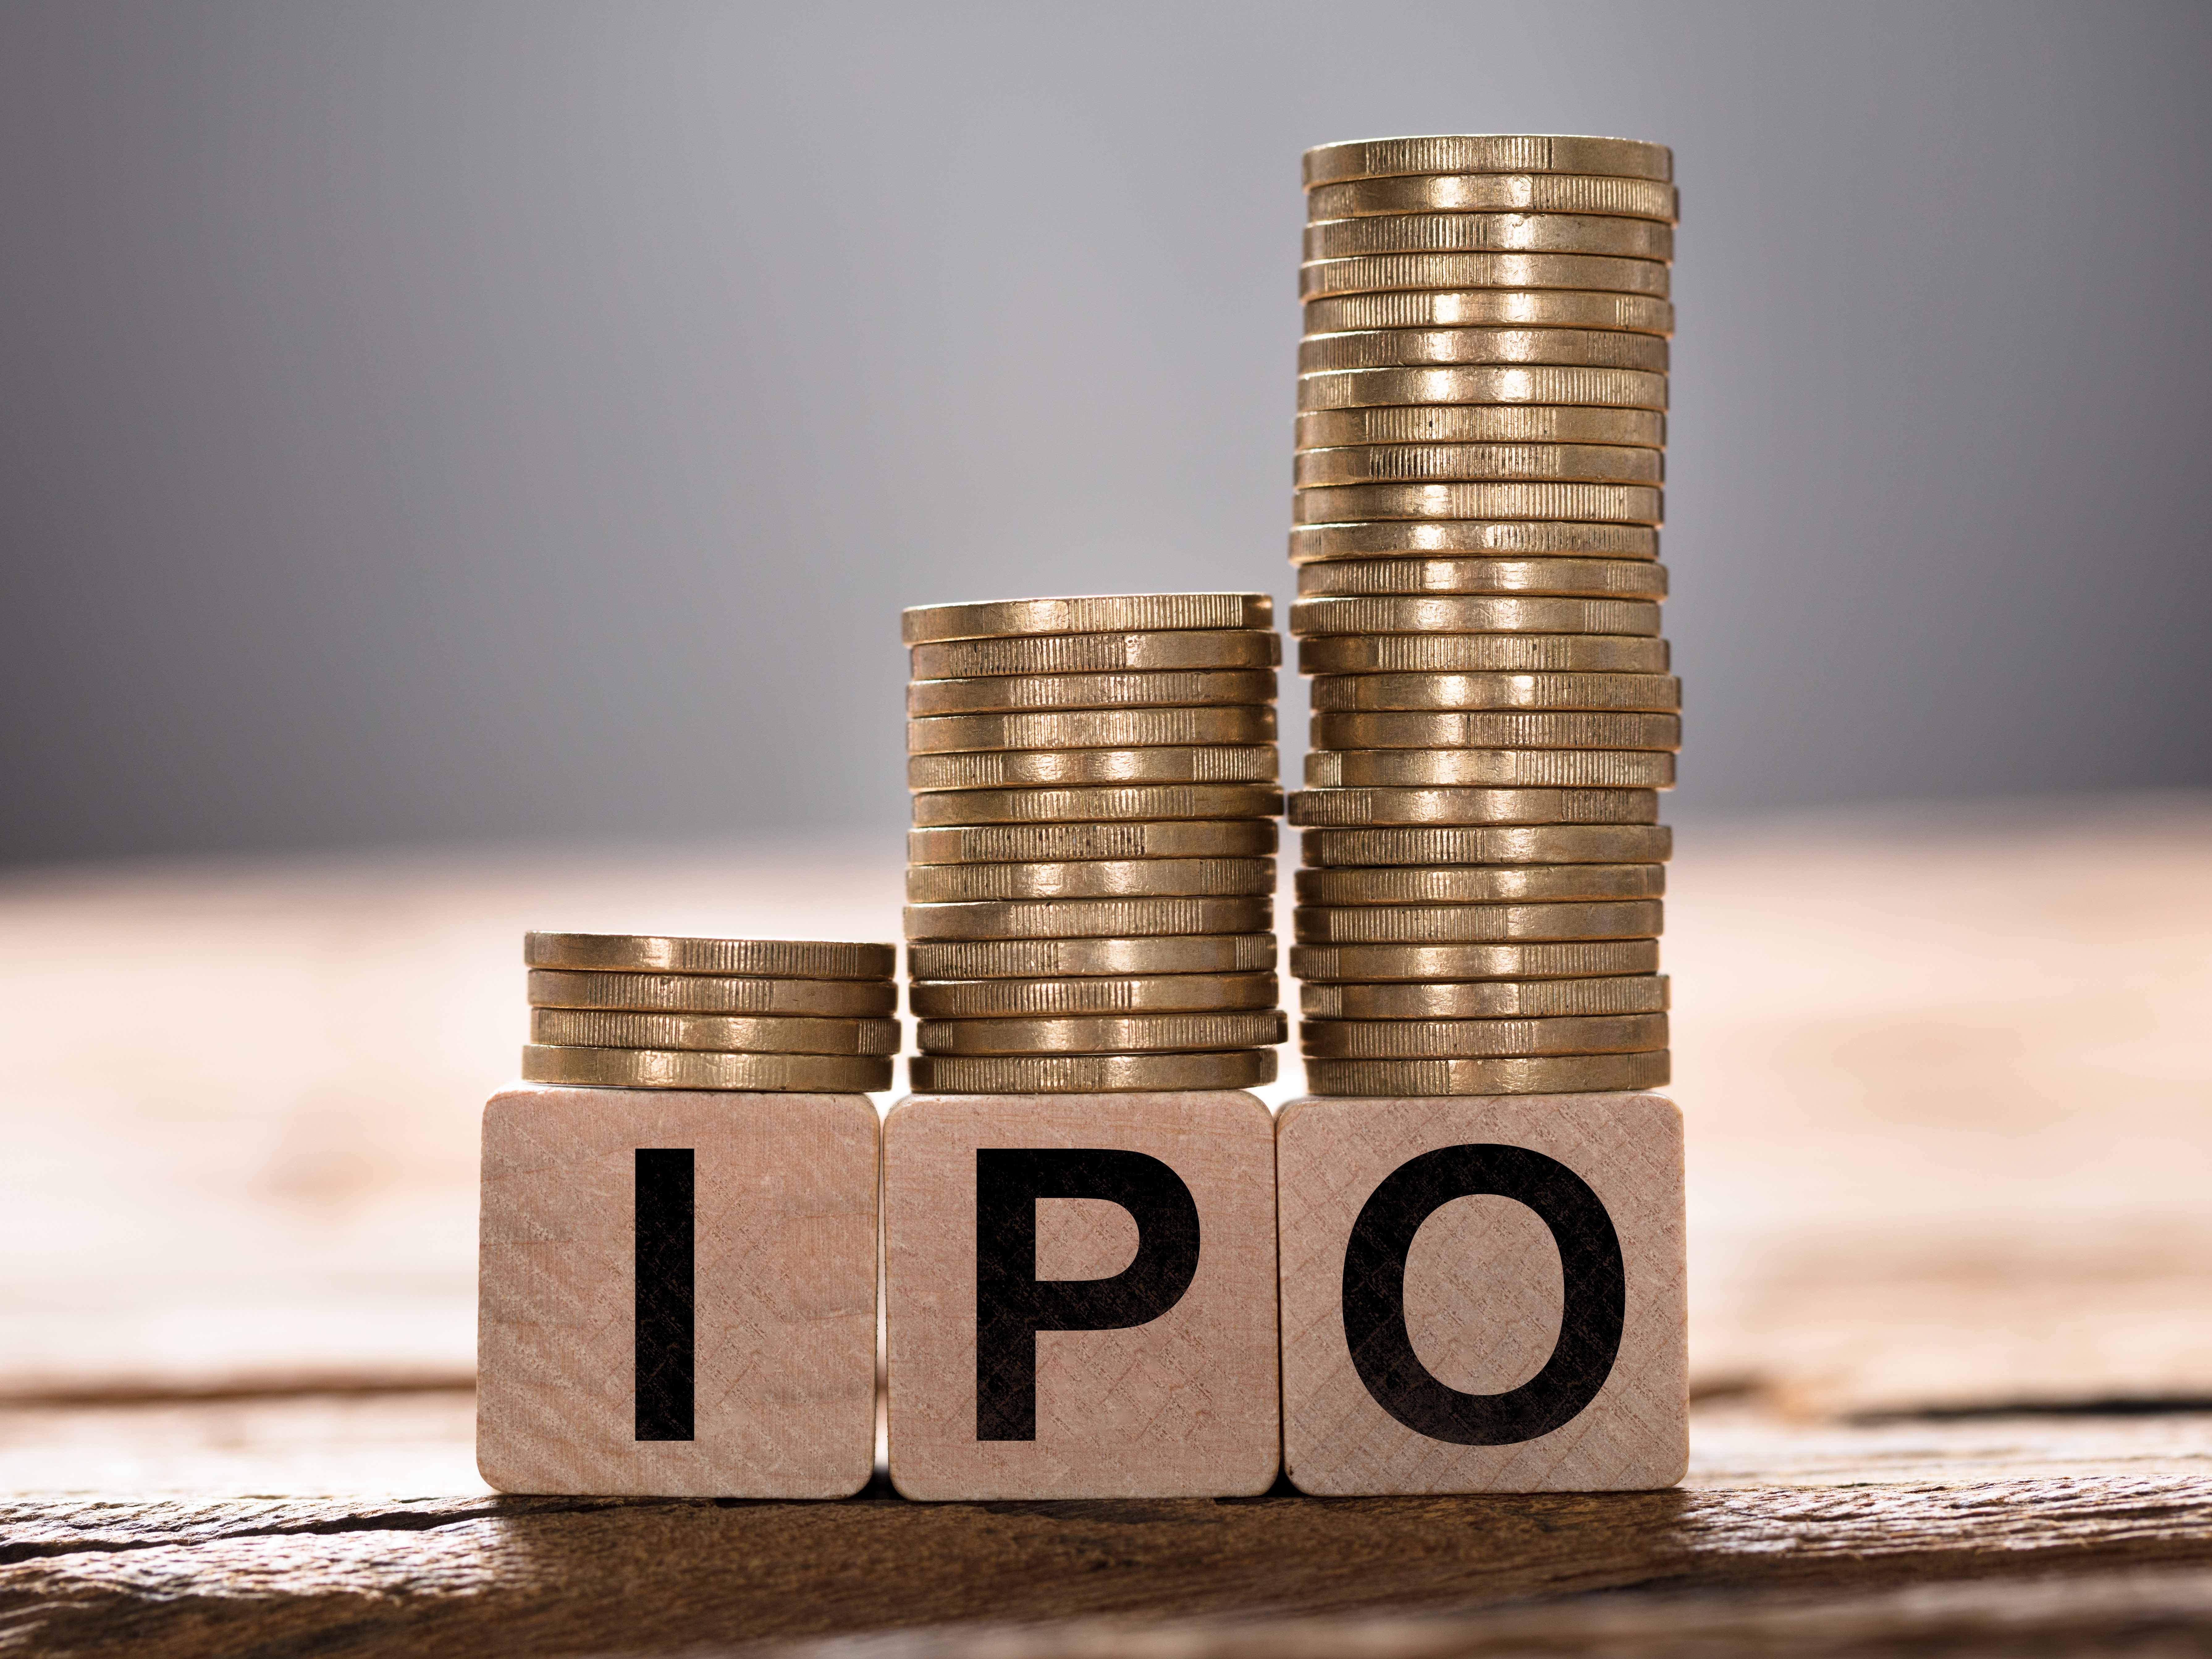 Public offer. Взлет – от стартапа до IPO. IPO. IPO картинки. IPO (initial public offering).